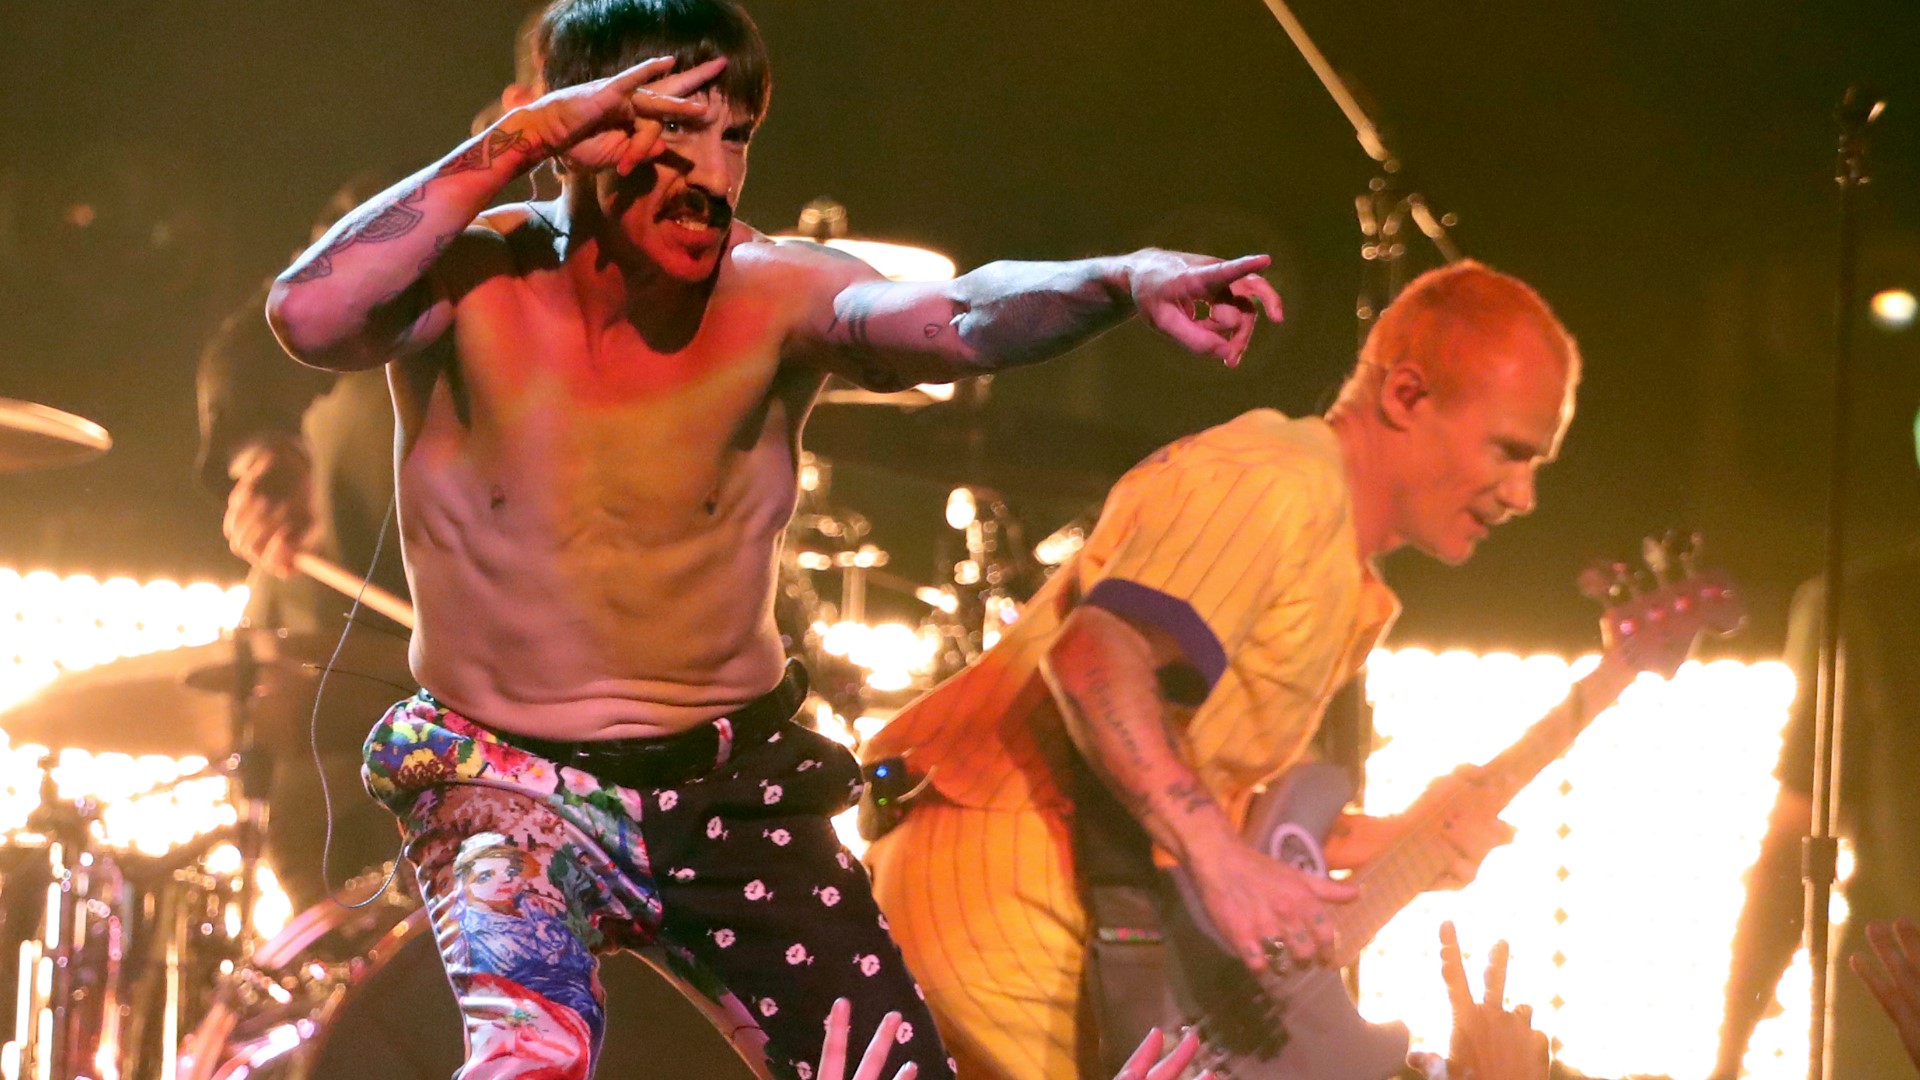 Red hot chili peppers love. RHCP 2022. Группа Red hot Chili Peppers 2022. Ред хот Чили пеперс 2022. Red hot Chili Peppers Tour 2022.